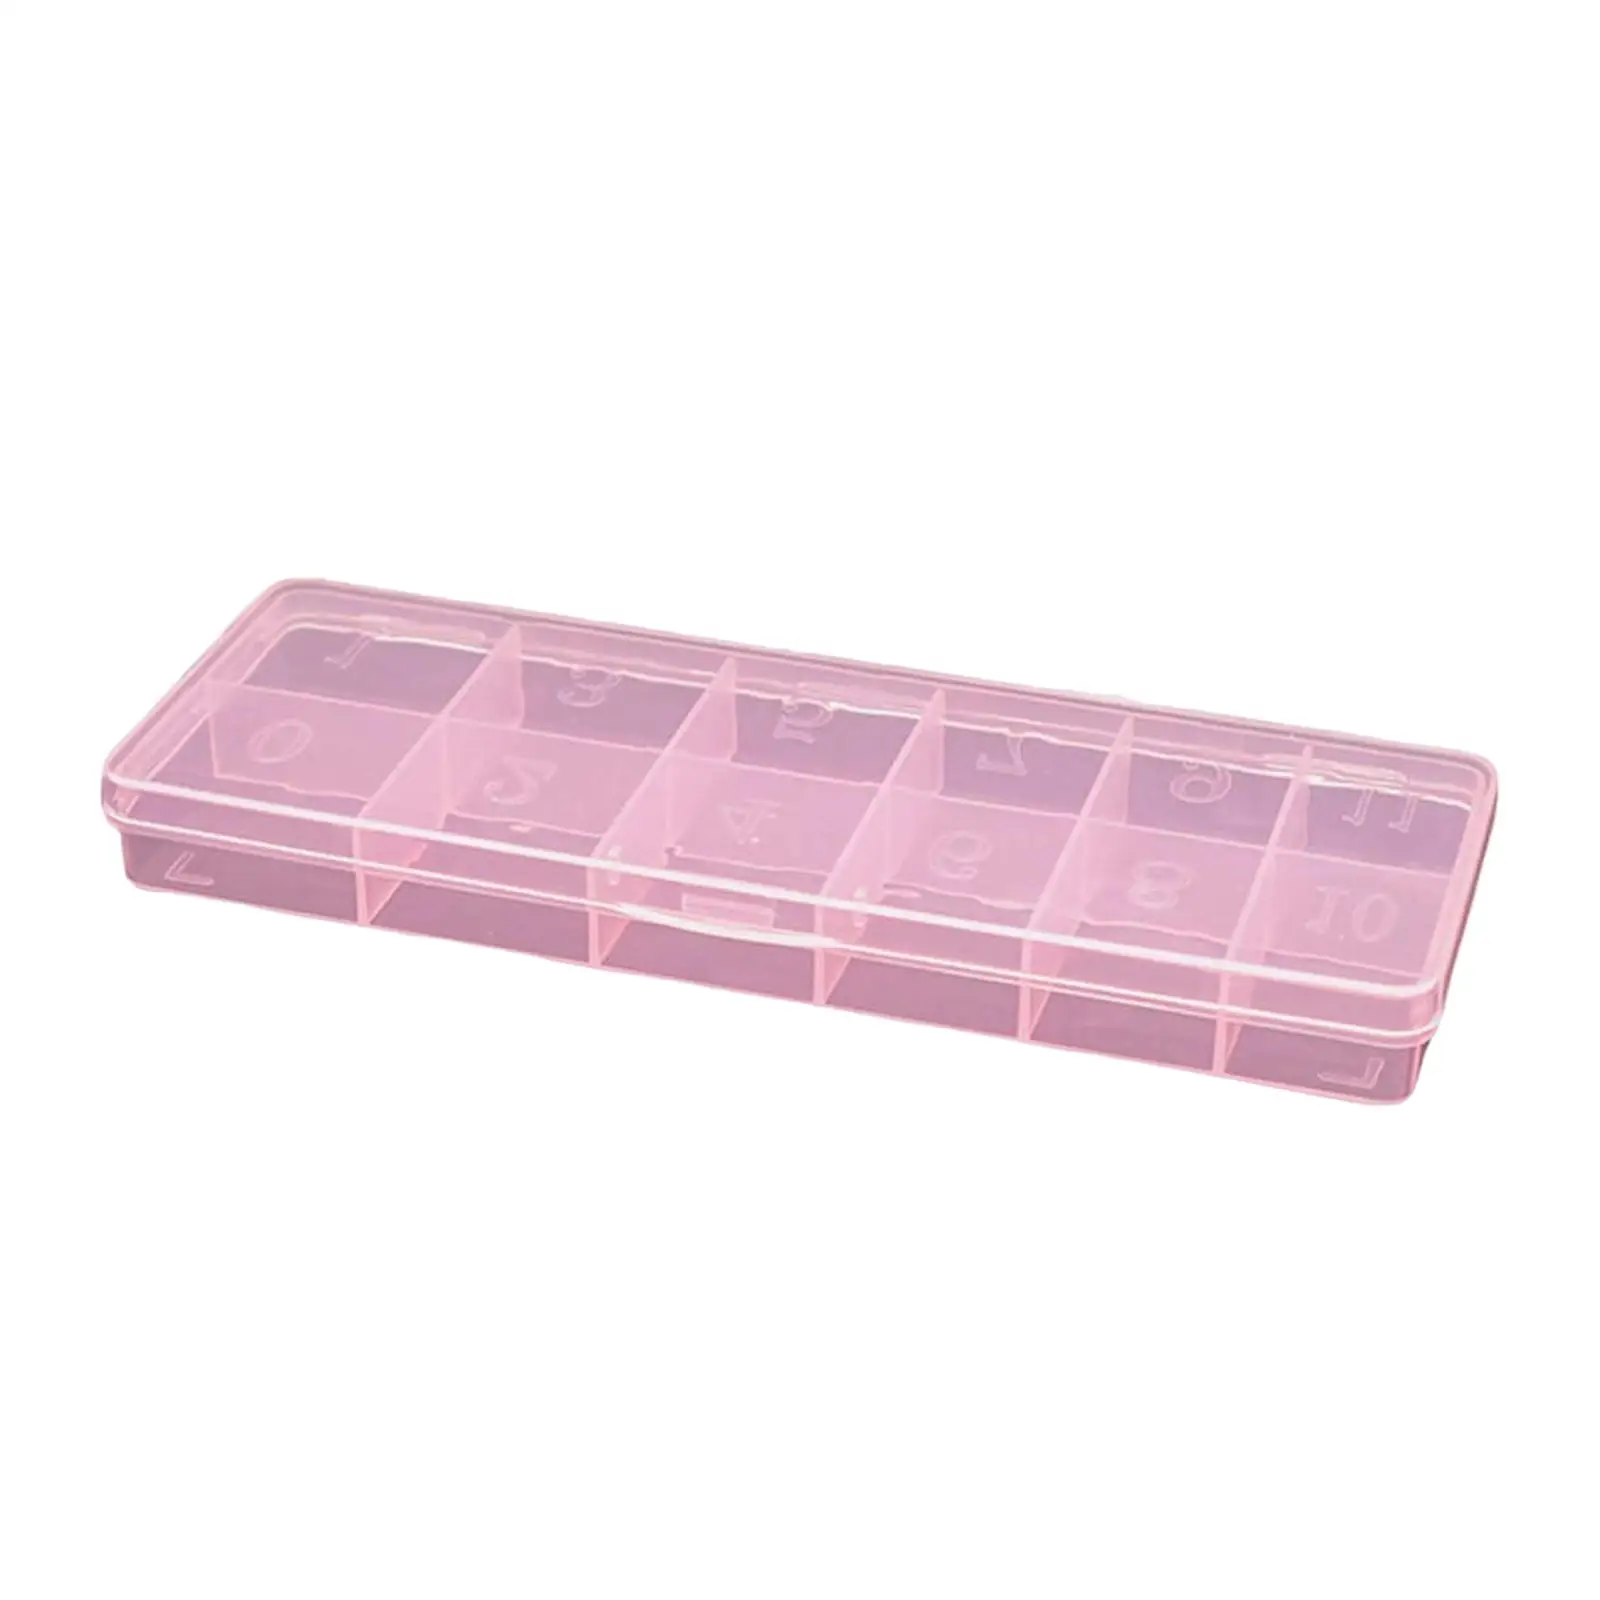 Plastic Nail Tips Organizer Storage Box with 0-11 Number Spaces 12 Compartments Nail Art Tools Container for Nail Accessories